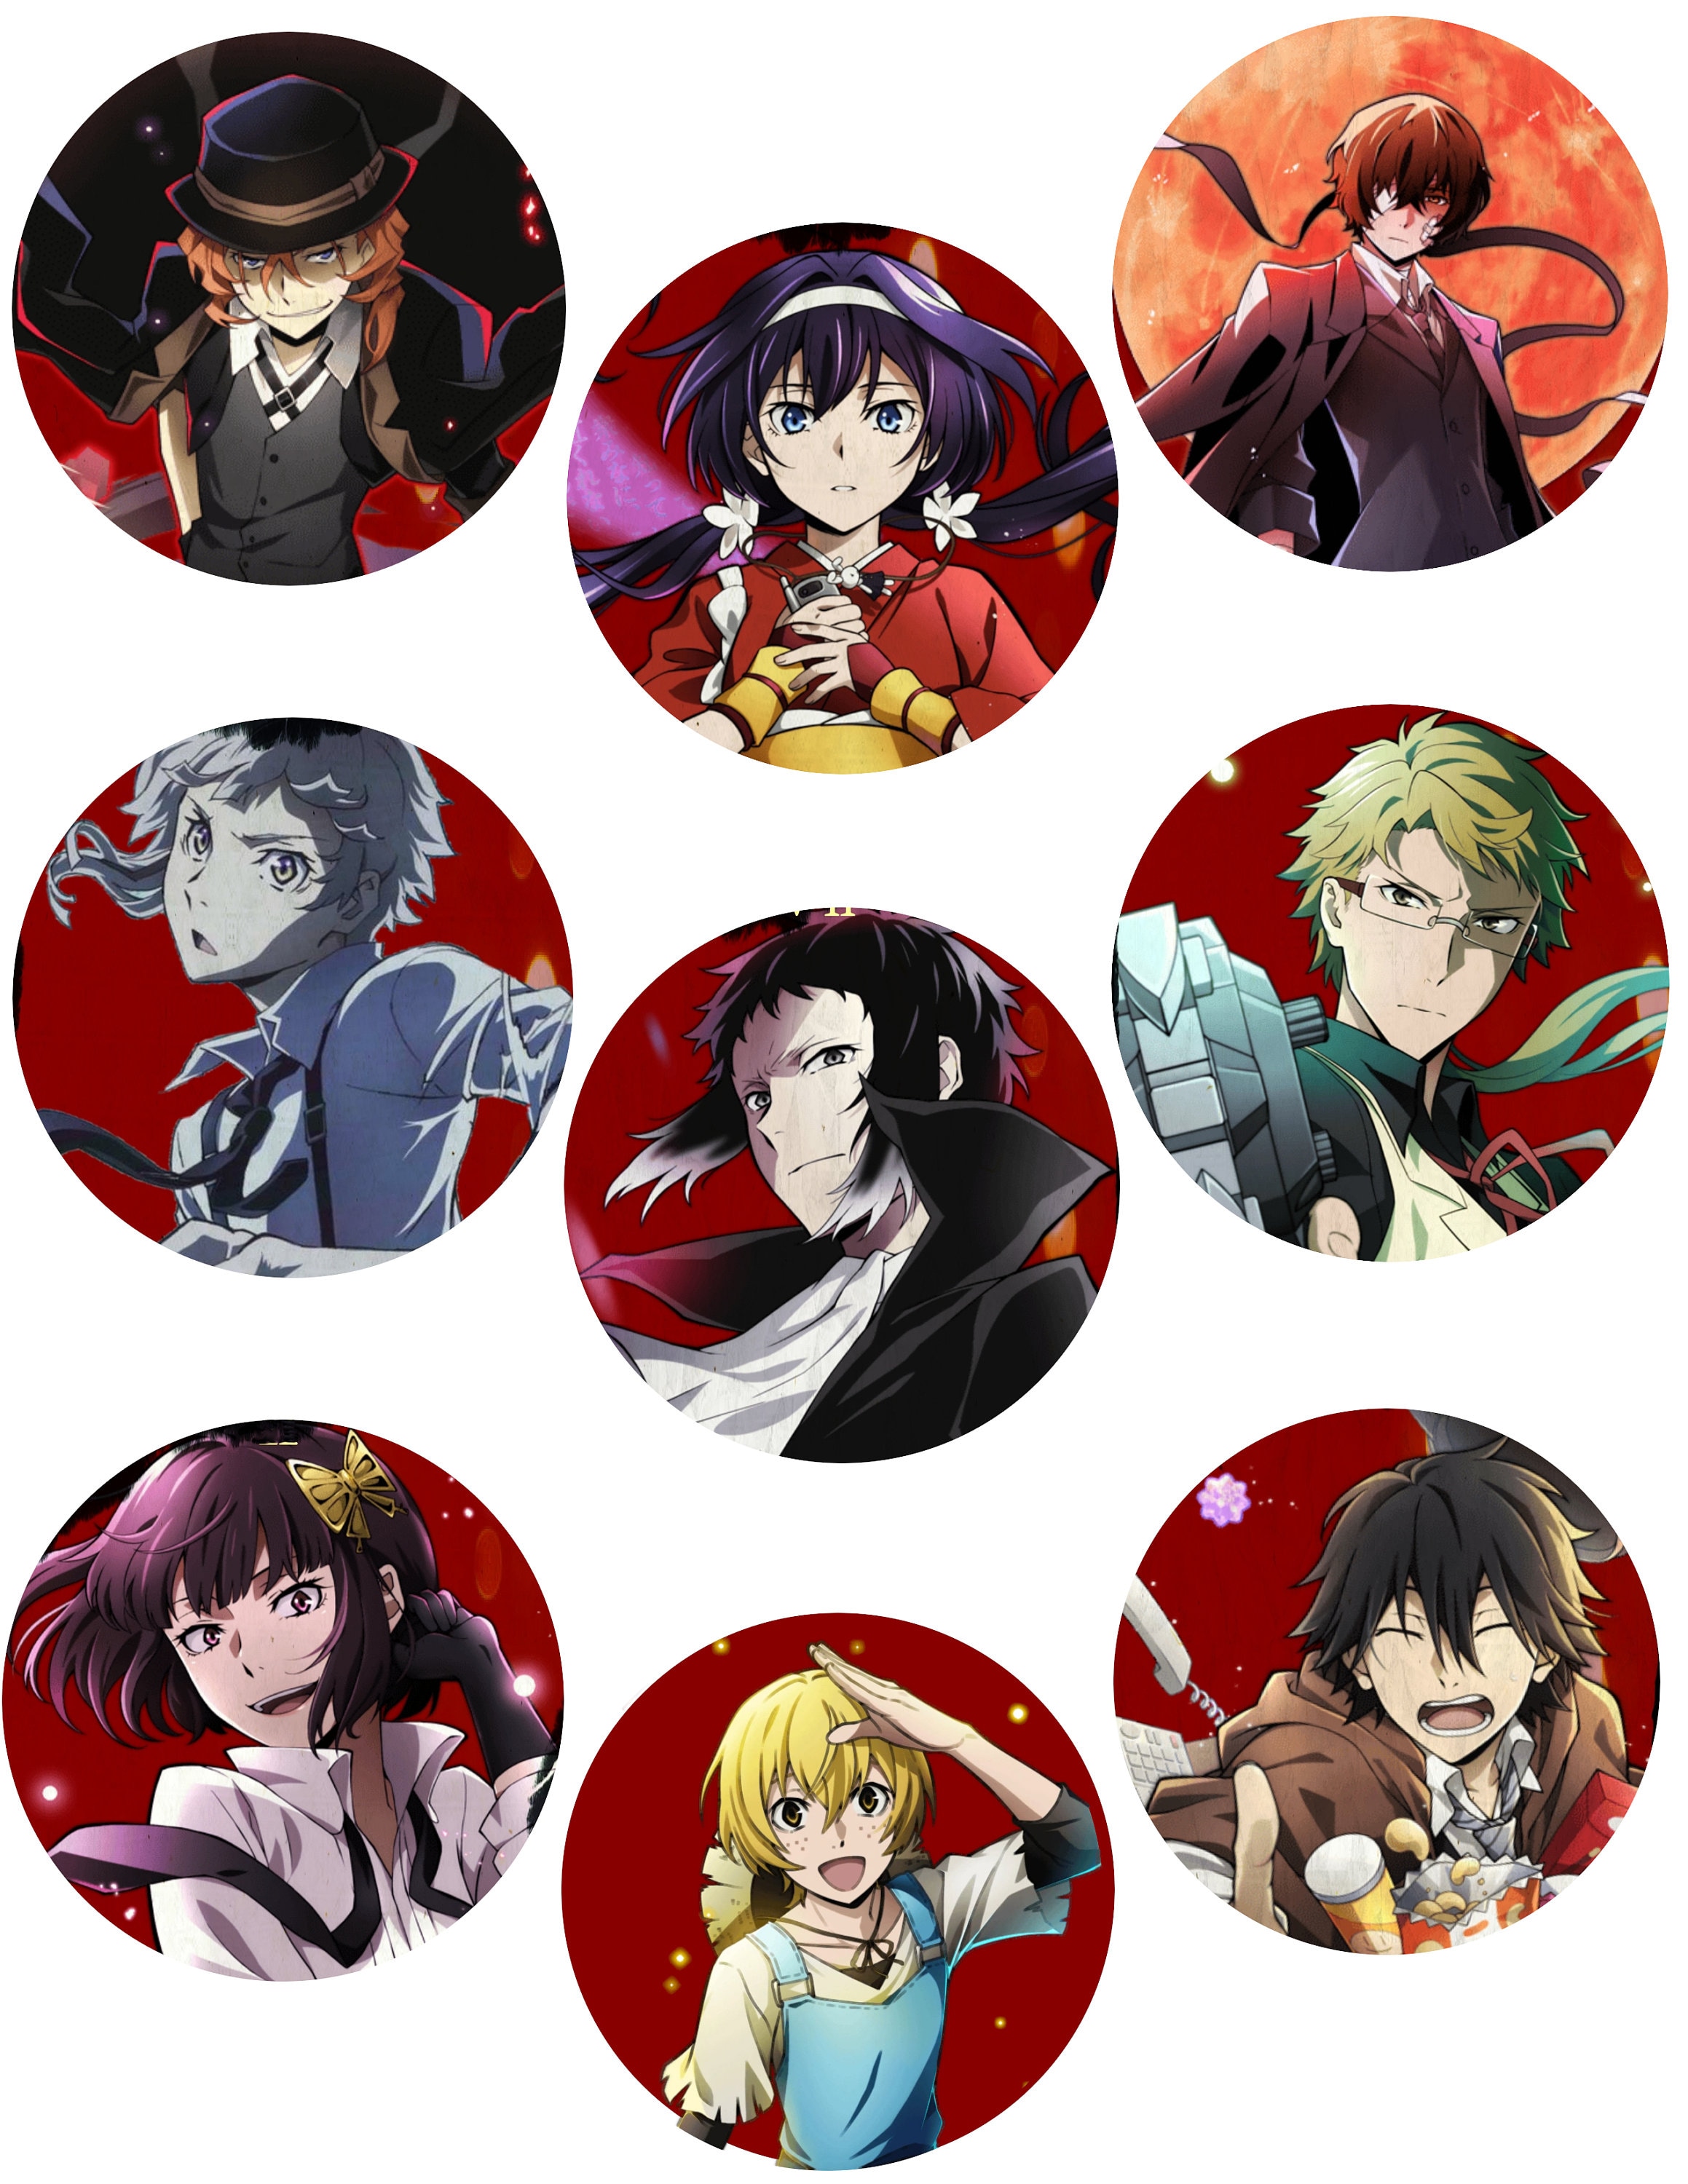 Pin by えリか on Bungou Stray Dogs  Stray dogs anime, Bungo stray dogs,  Bongou stray dogs